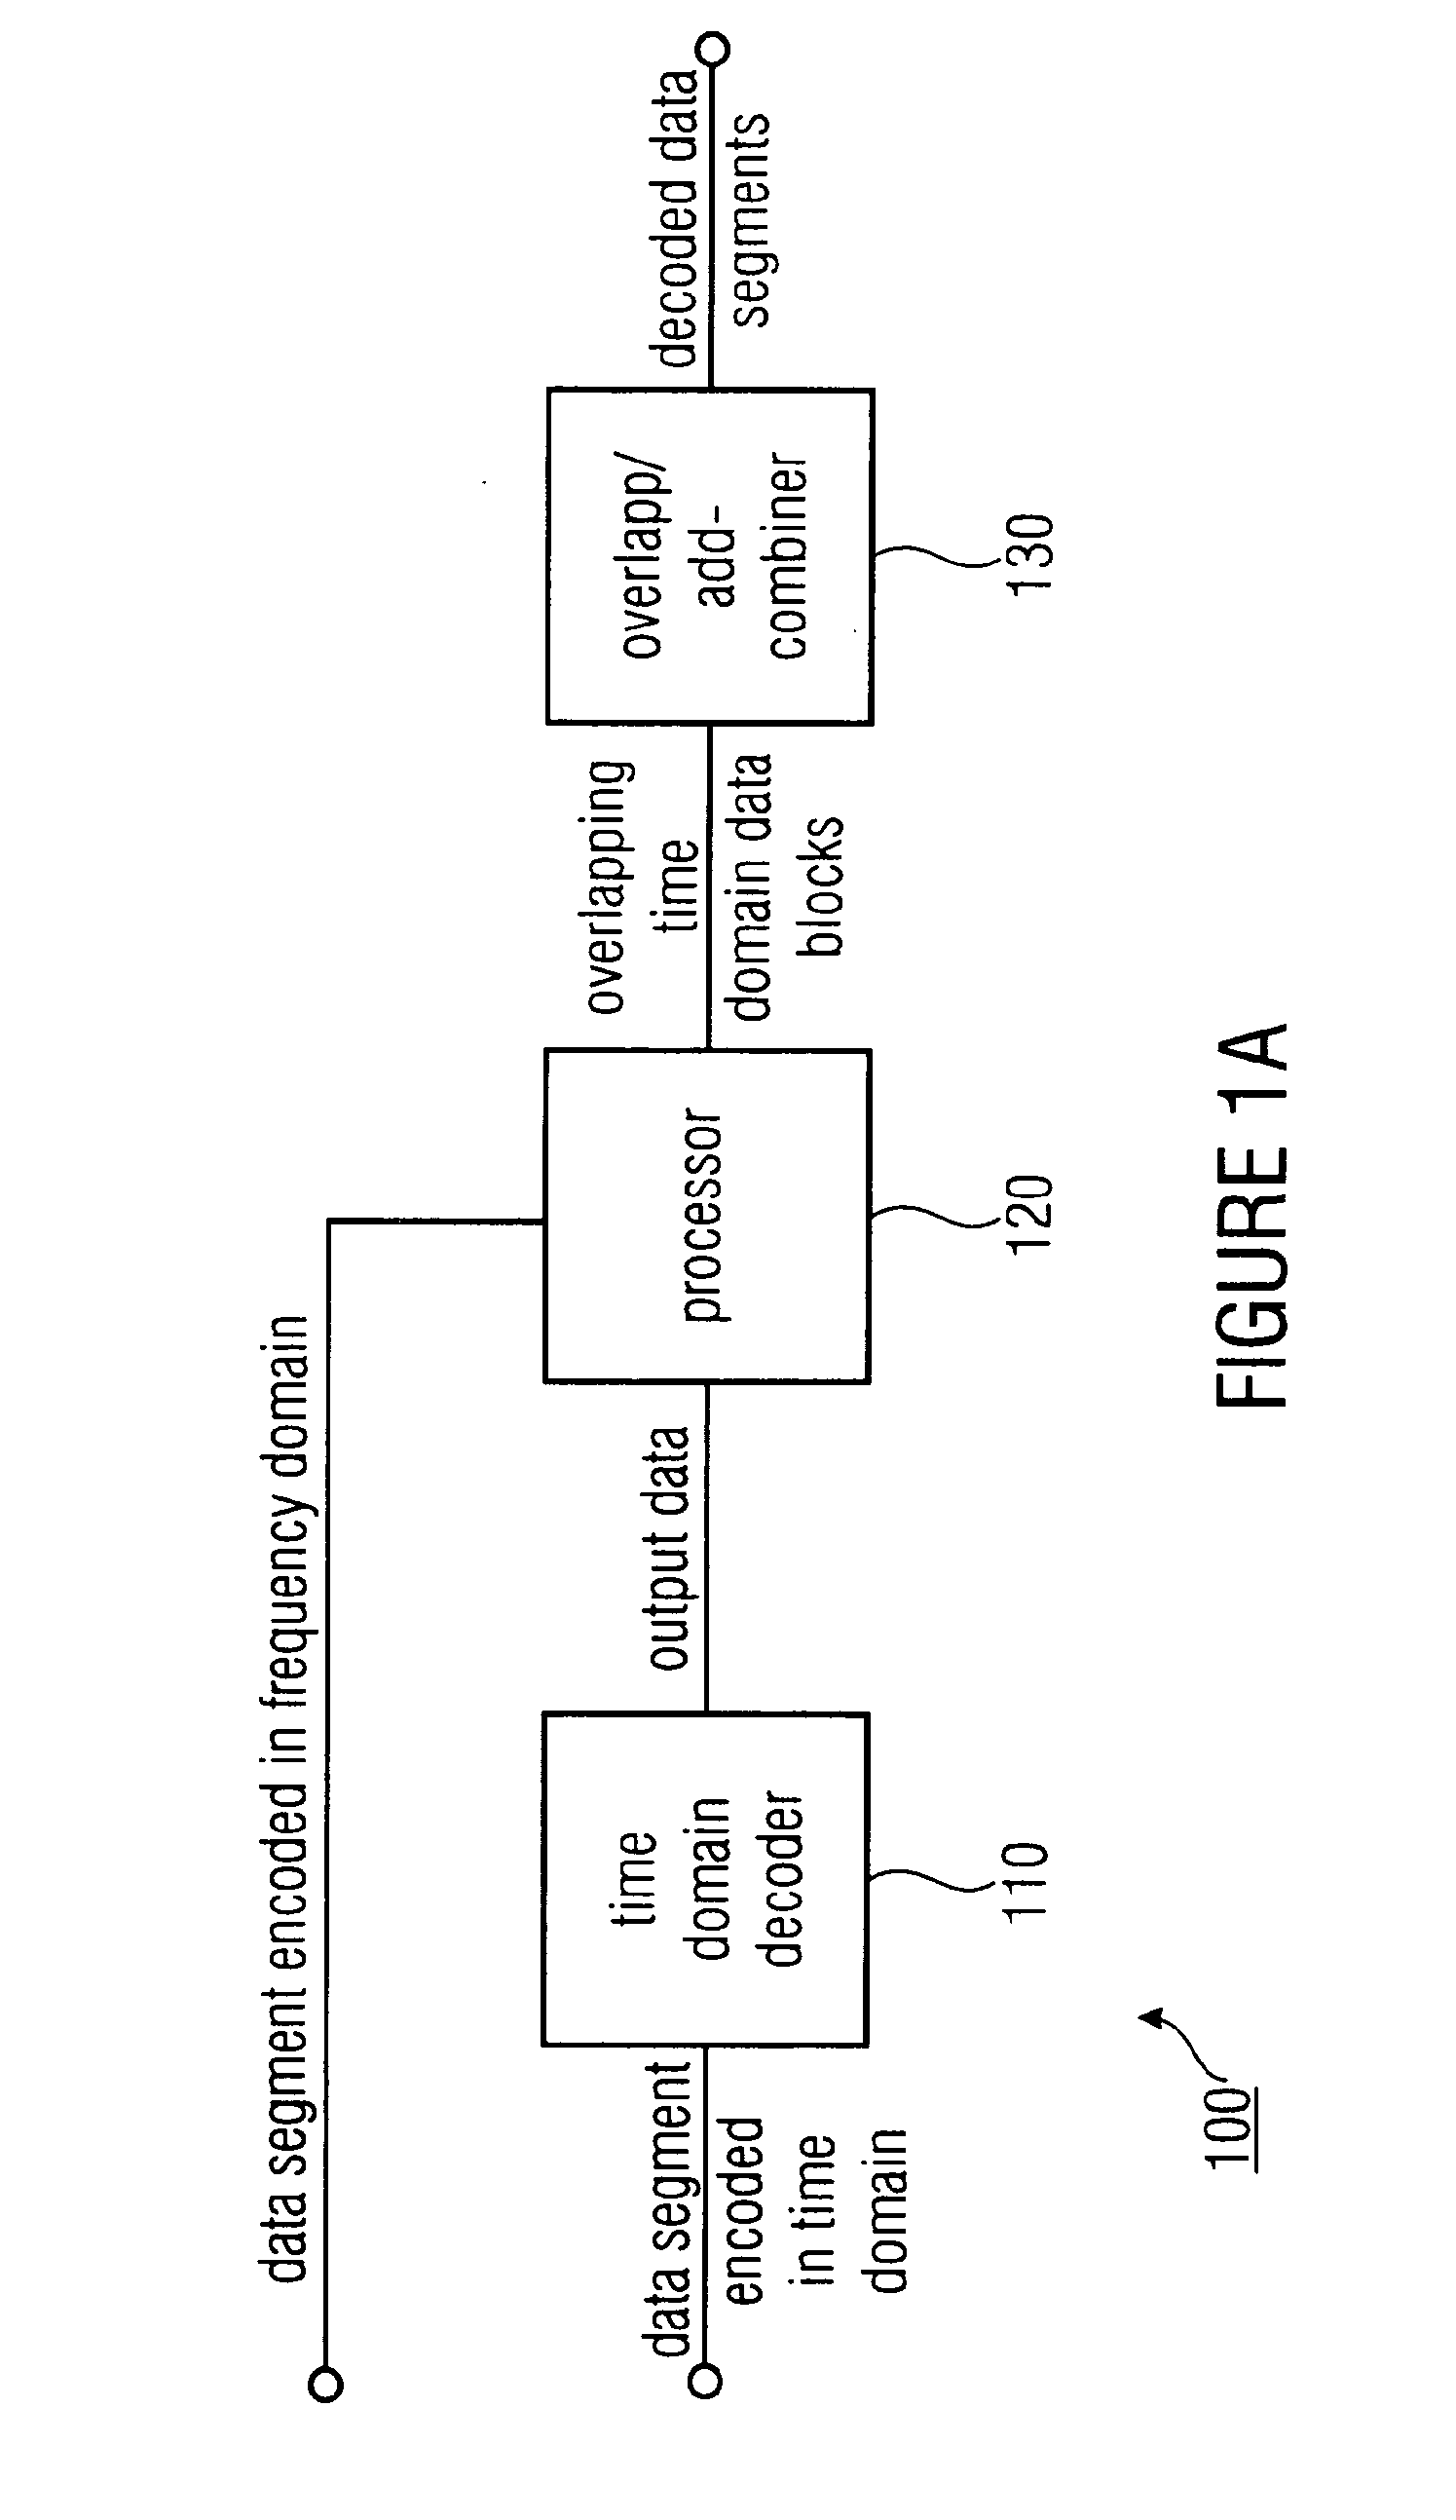 Encoder, Decoder and Methods for Encoding and Decoding Data Segments Representing a Time-Domain Data Stream